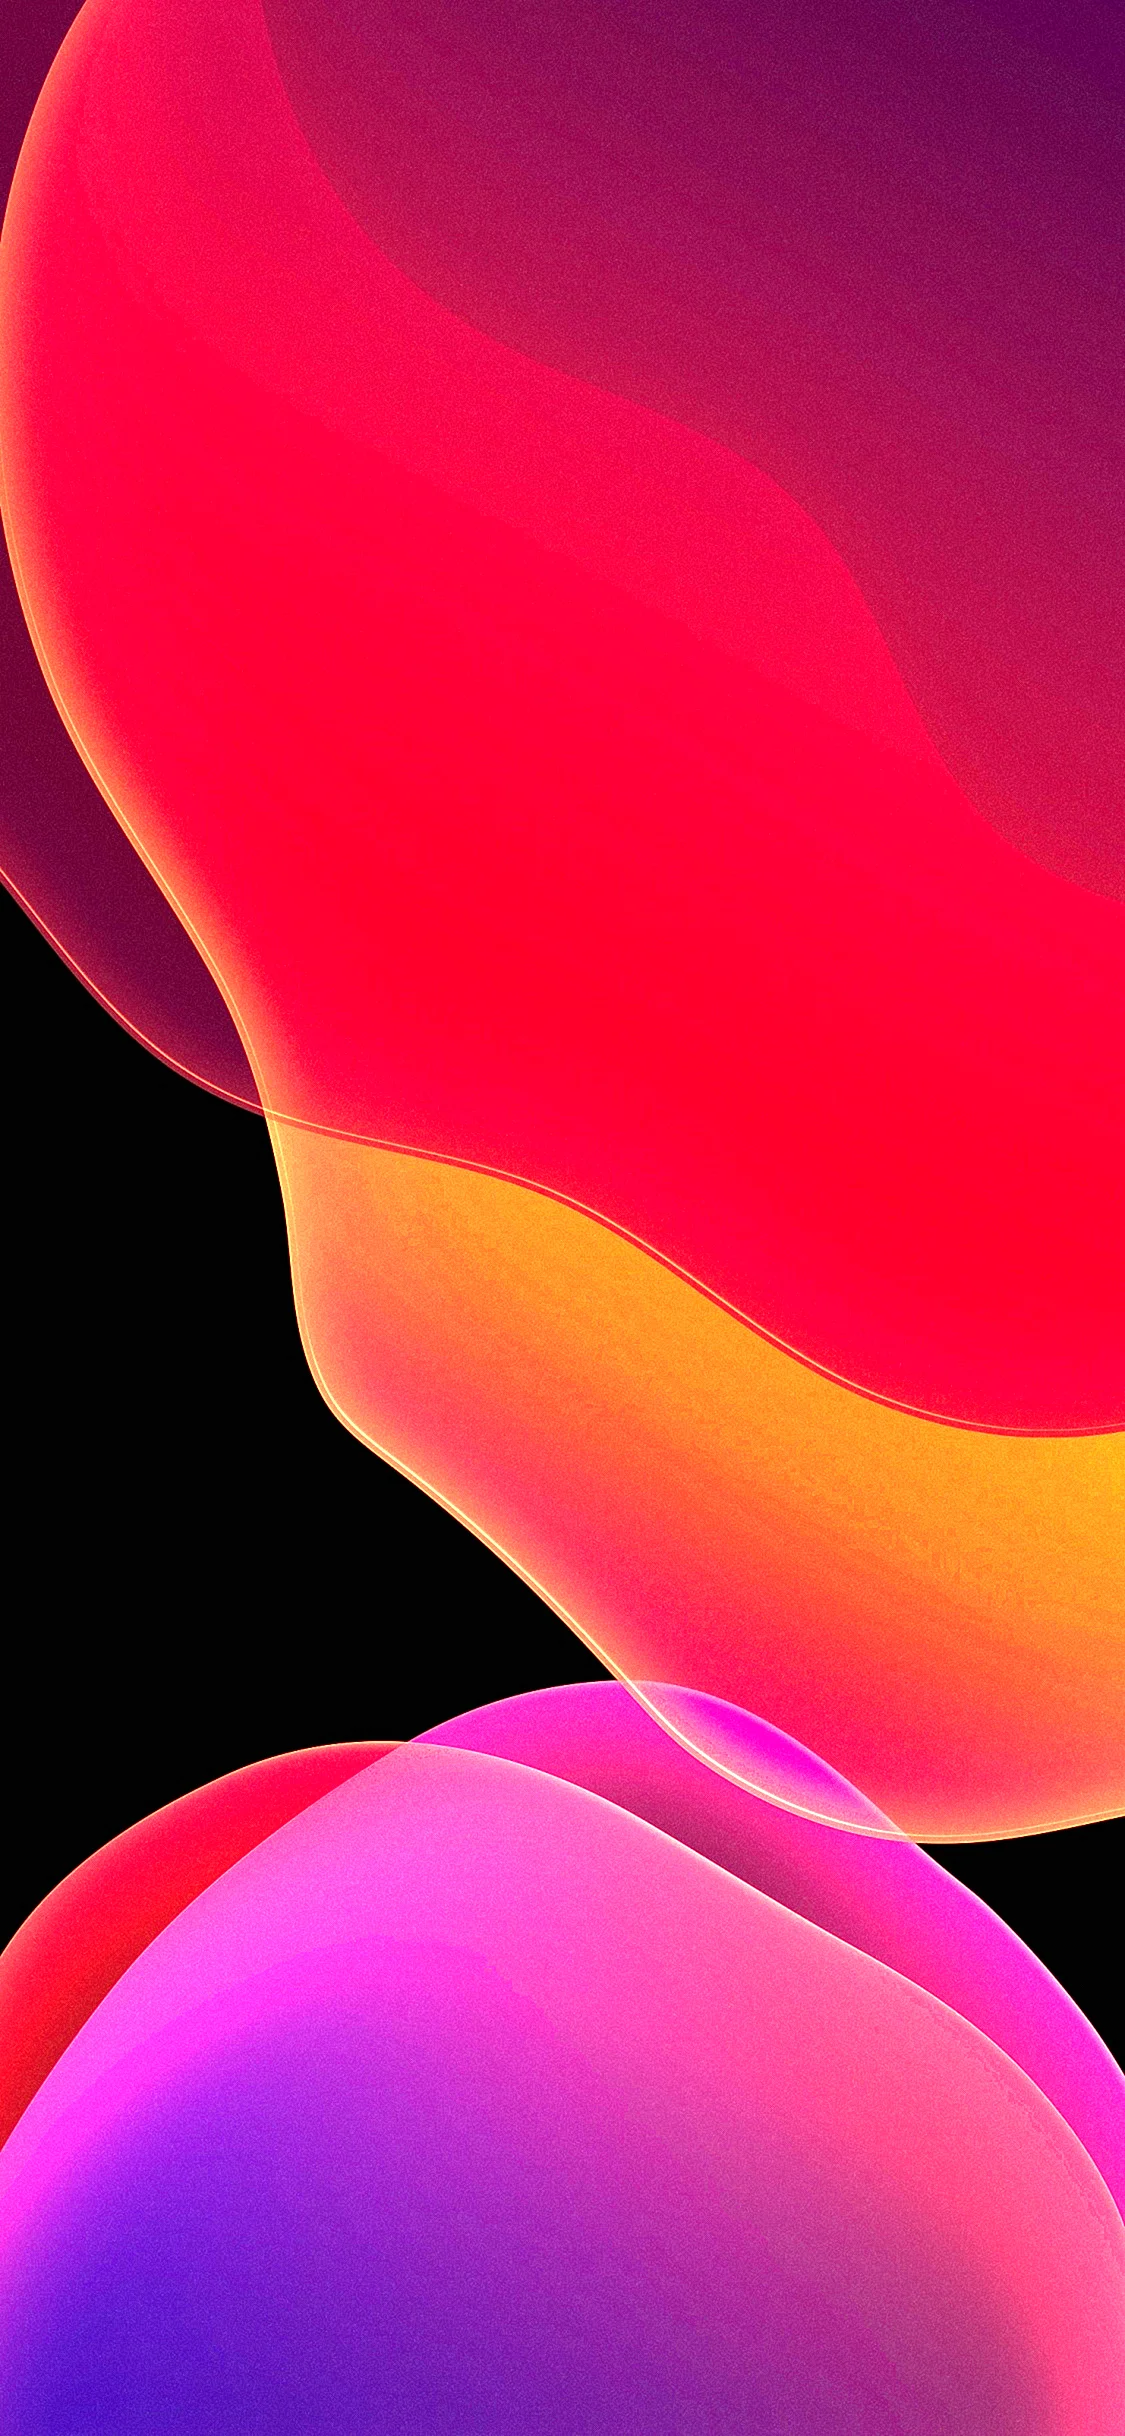 IOS 13 Wallpaper For iPhone